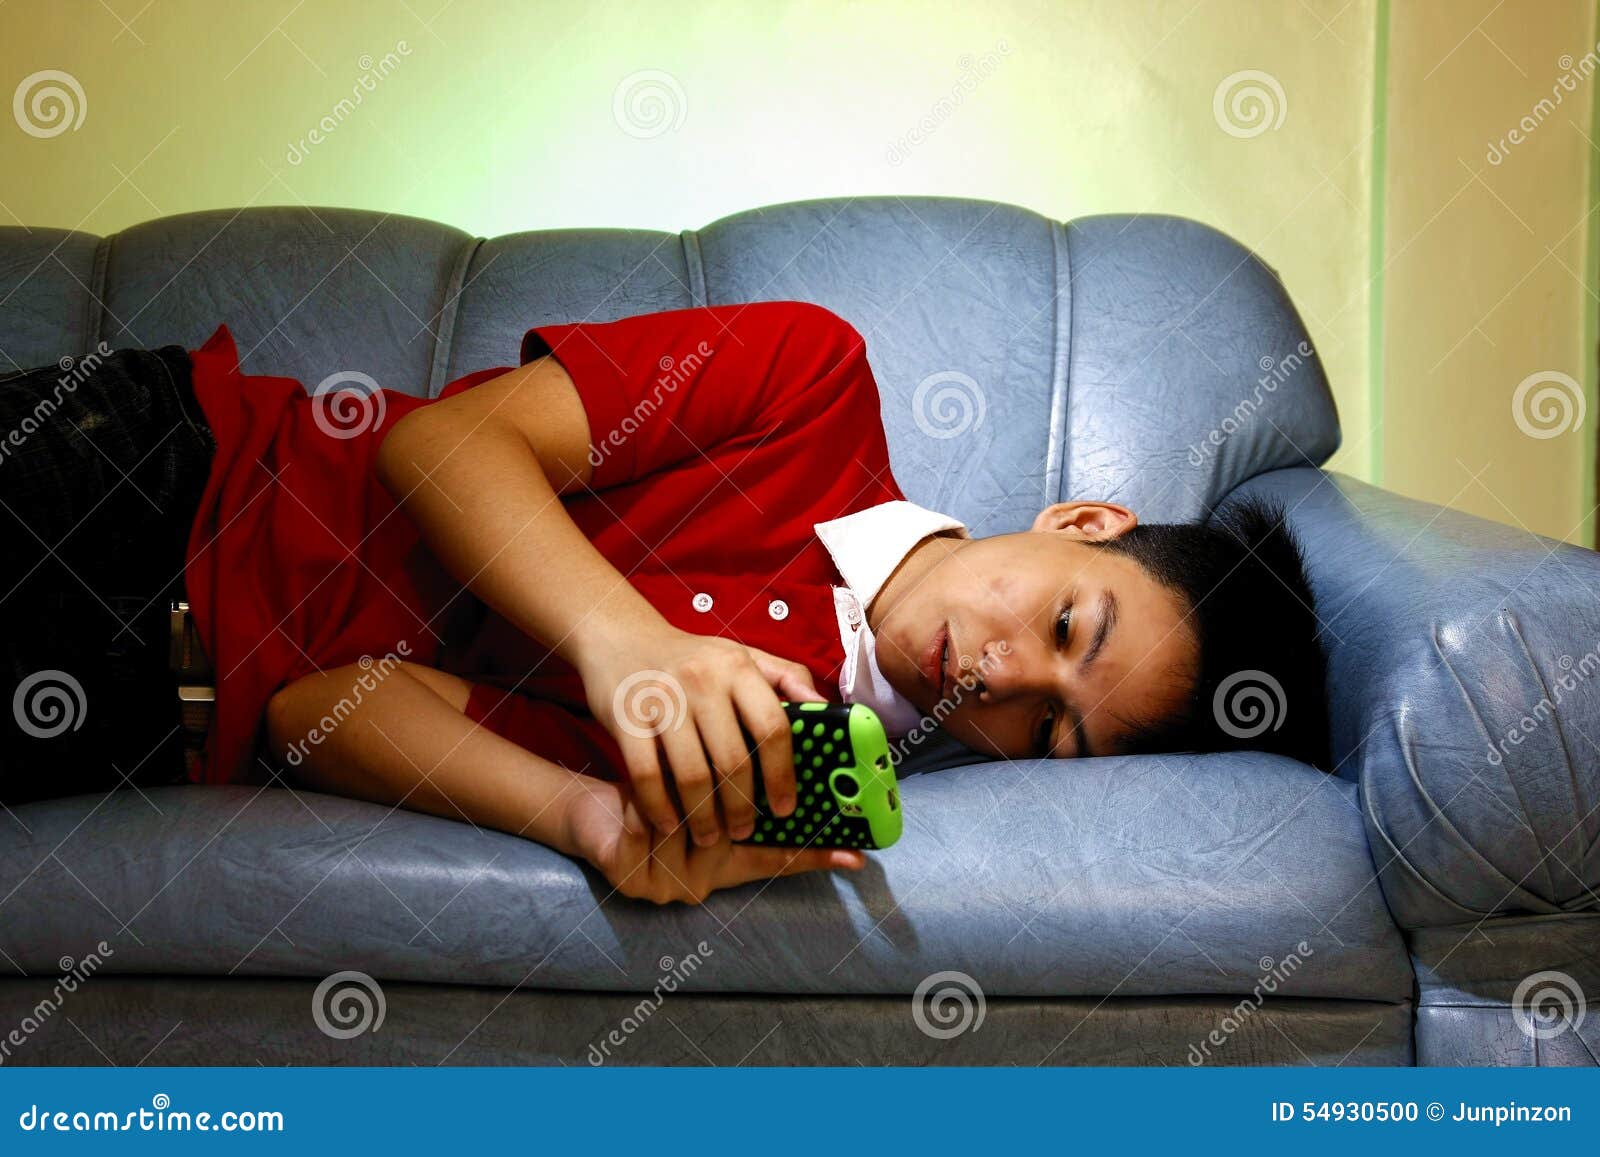 Teen using a smartphone while lying down on a couch and 